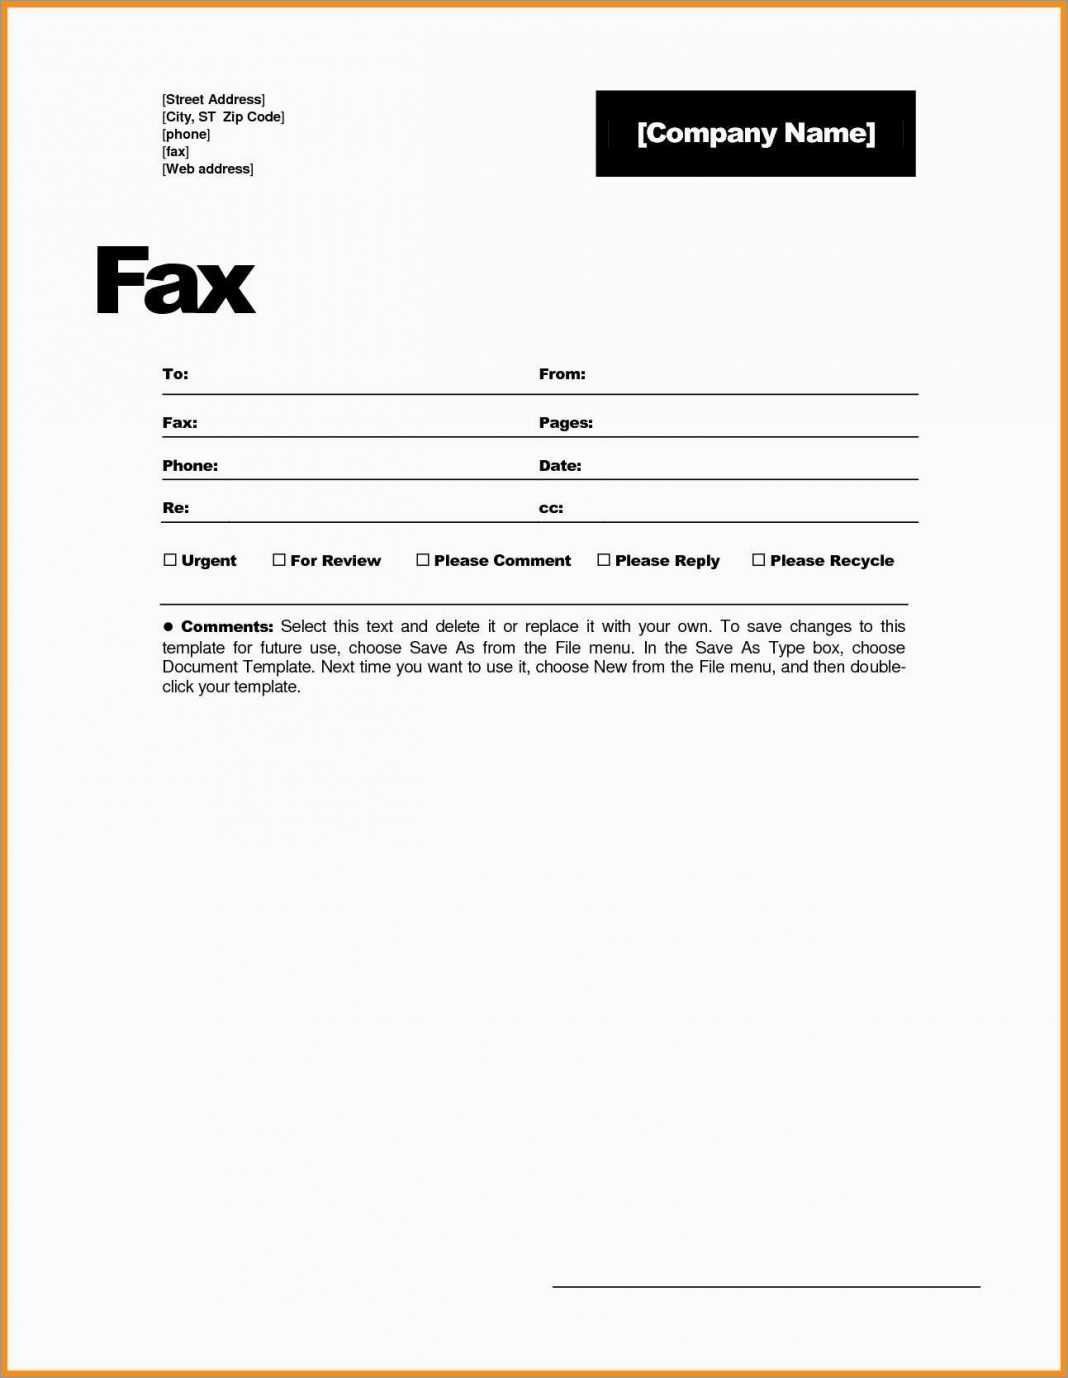 Fax Cover Sheet Plate Word Spreadsheet Examples Page Free Inside Fax Cover Sheet Template Word 2010